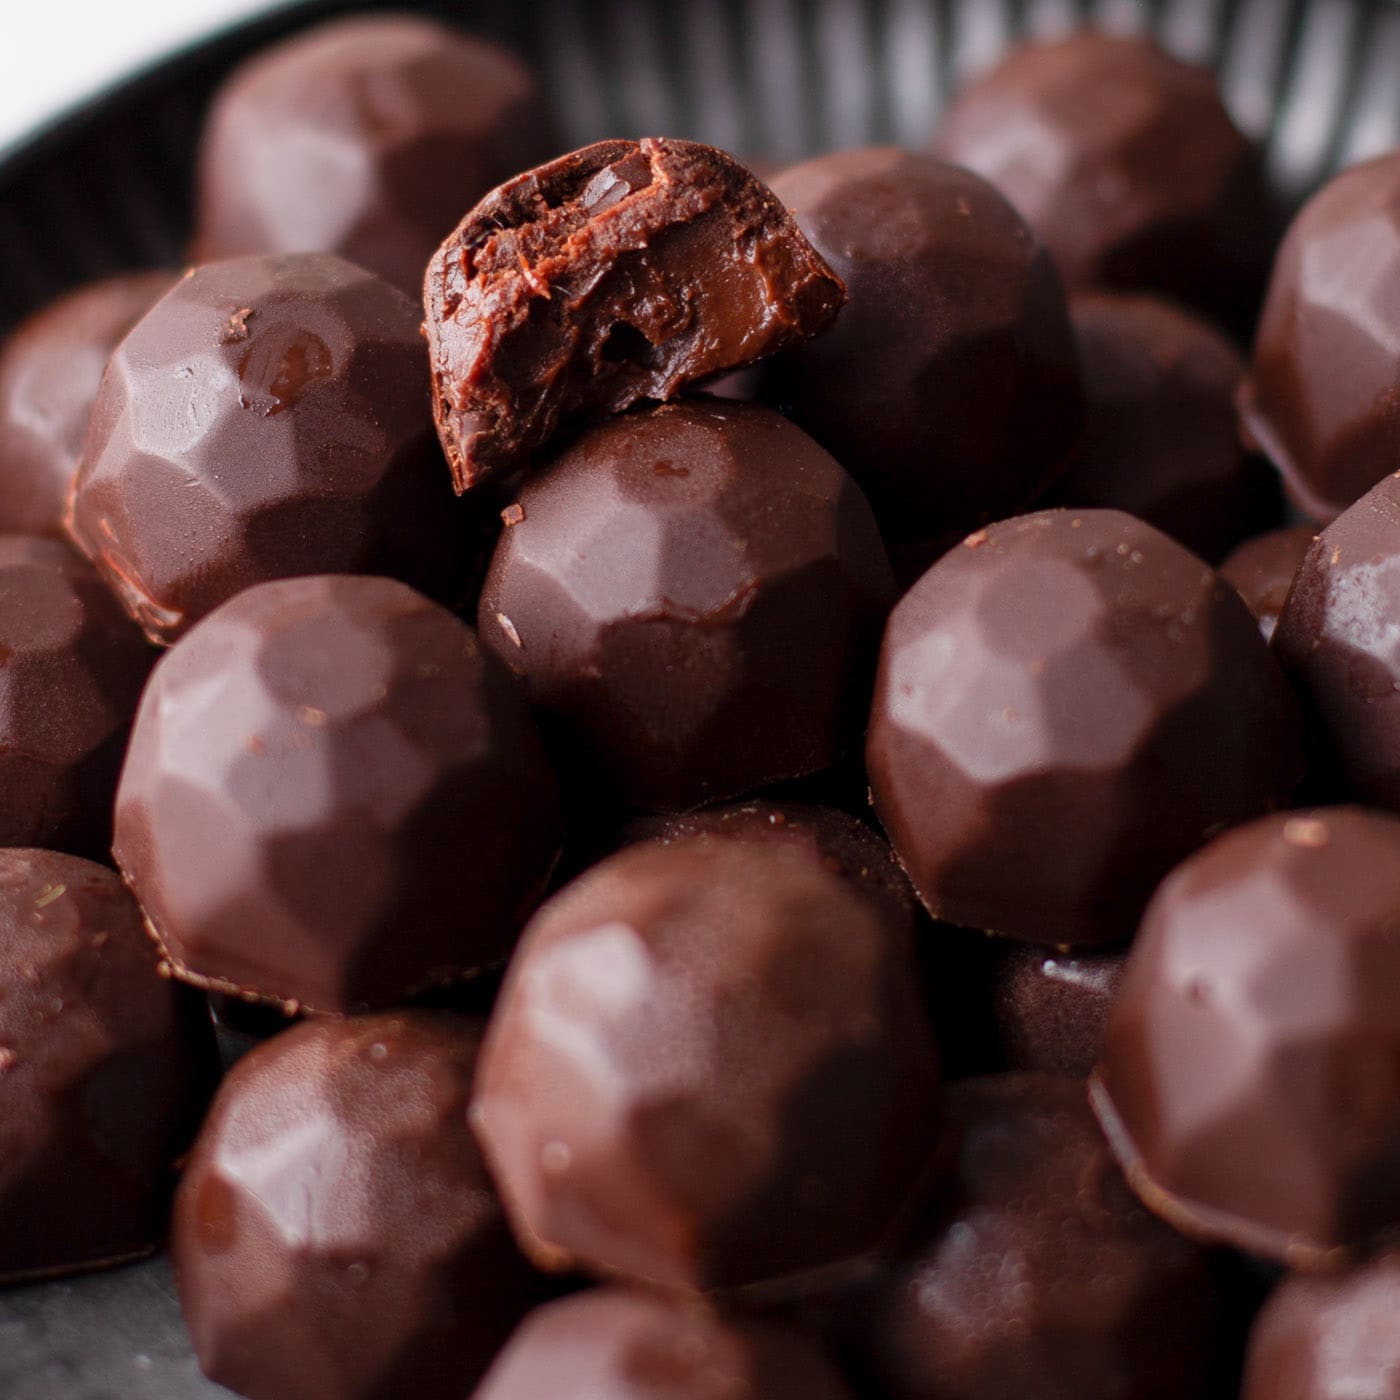 How to Make Molded and Filled Chocolates